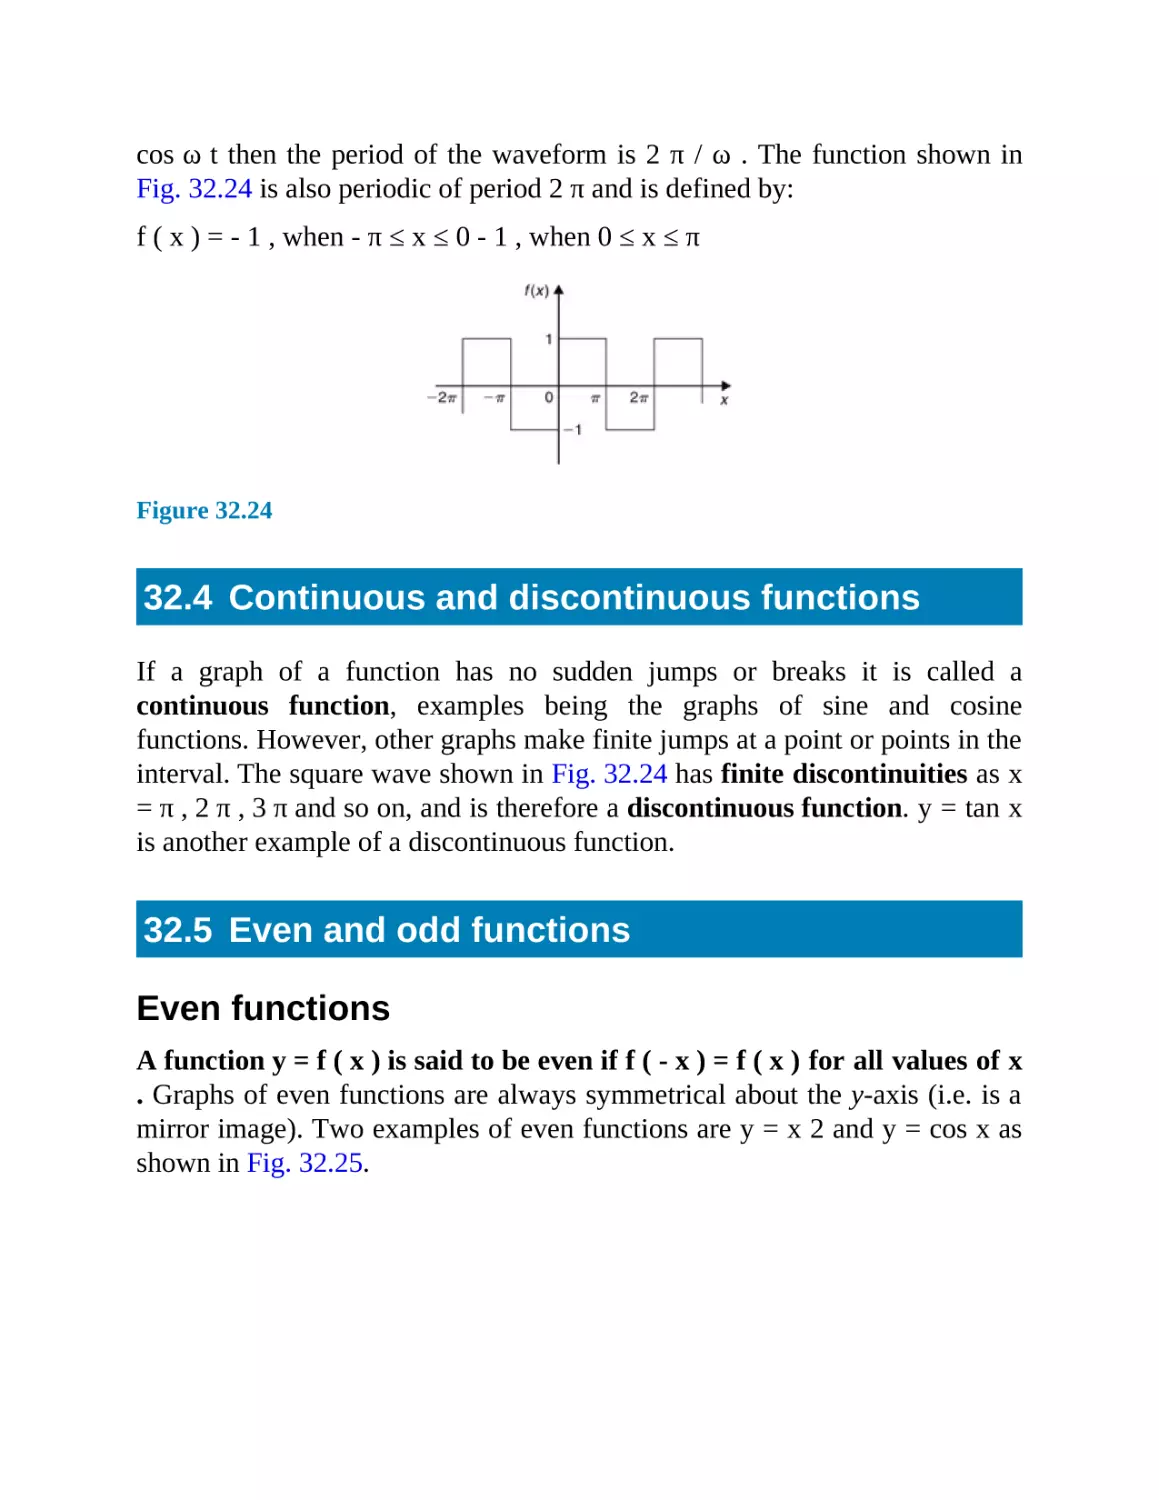 32.4 Continuous and discontinuous functions
32.5 Even and odd functions